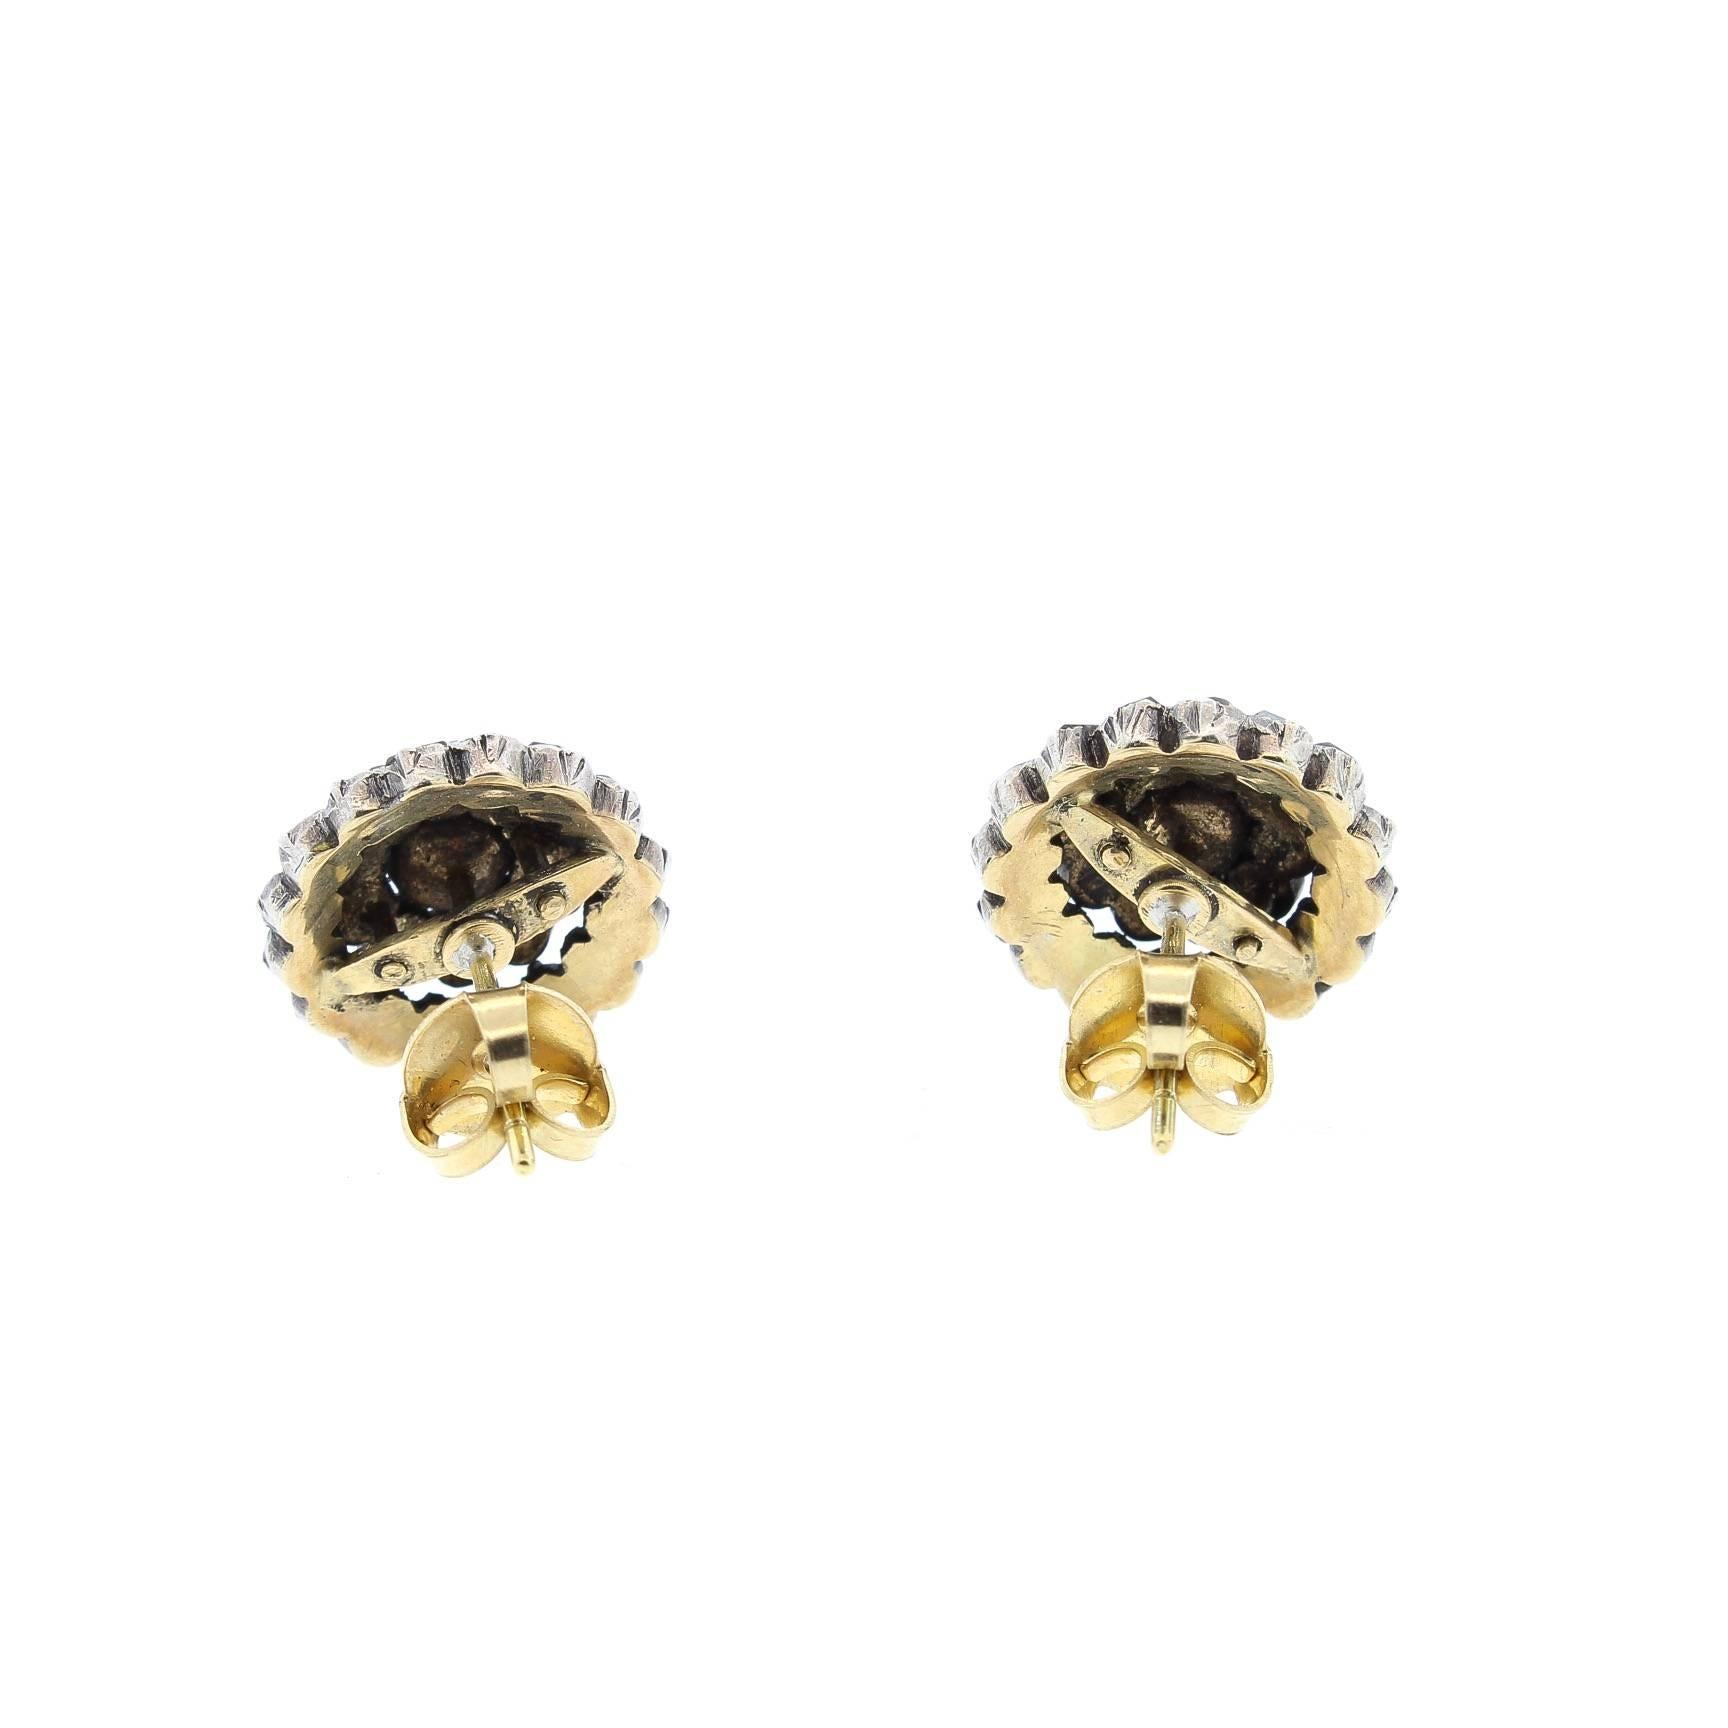 A pair of antique silver topped gold rose cut diamond cluster earrings, circa 1880. Formed as two rows of rose cut diamonds centering upon a larger rose cut. These earrings are dimensional and easy to wear. There are 54 rose cut diamonds that weigh